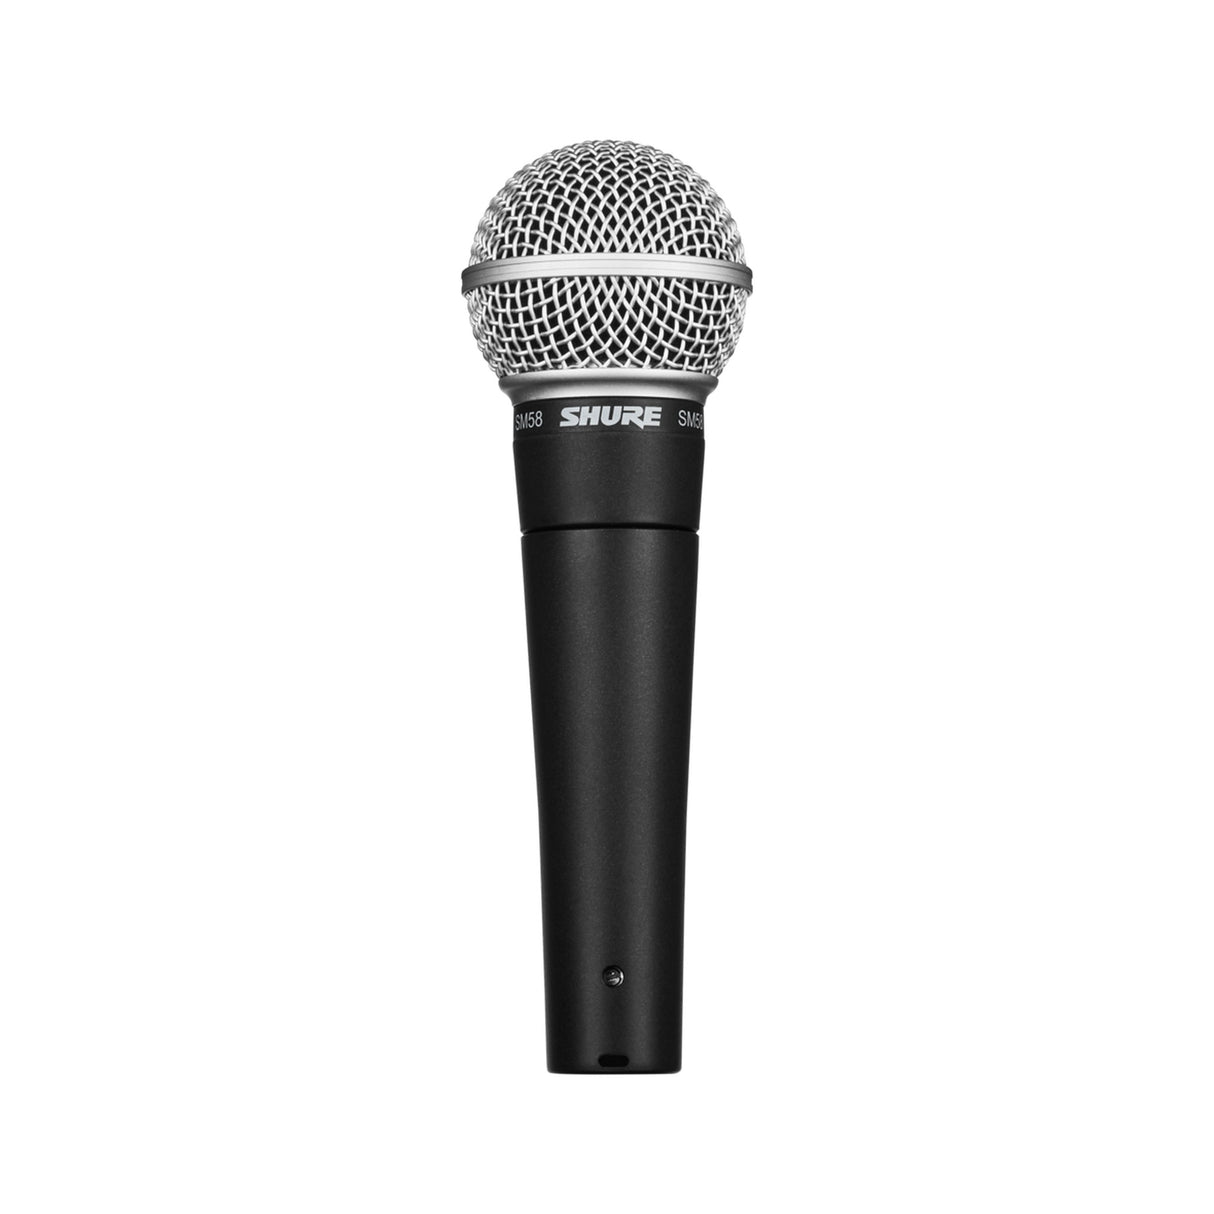 Shure SM58 Cardioid Dynamic Live Microphone without Cable